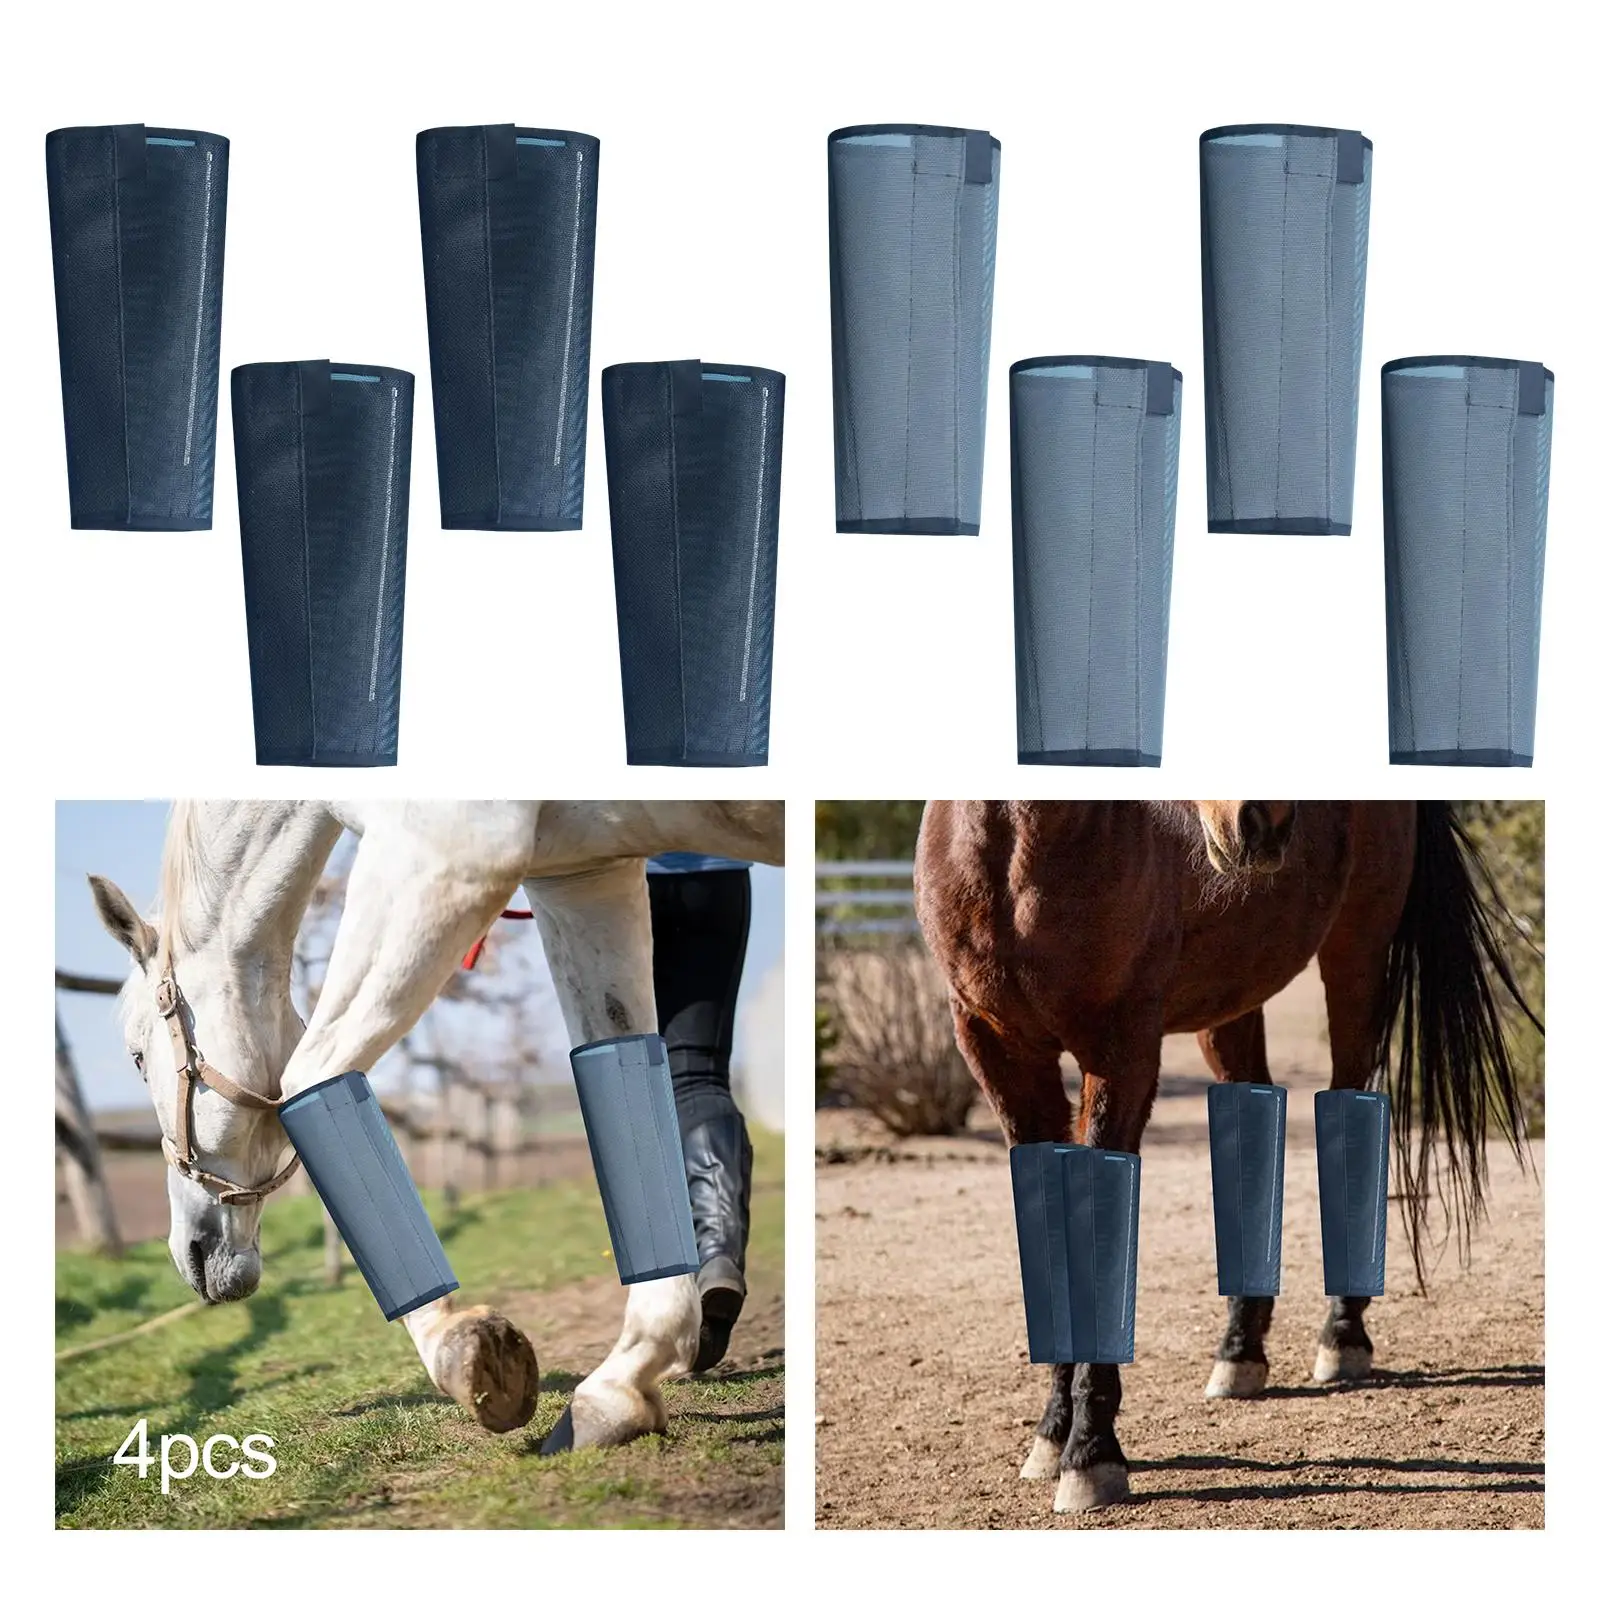 4Pcs Horse Boots Mesh Breathable Outdoor Protector Training Riding Jumping Running Leg Gear Leg Wraps Equestrian Accessories